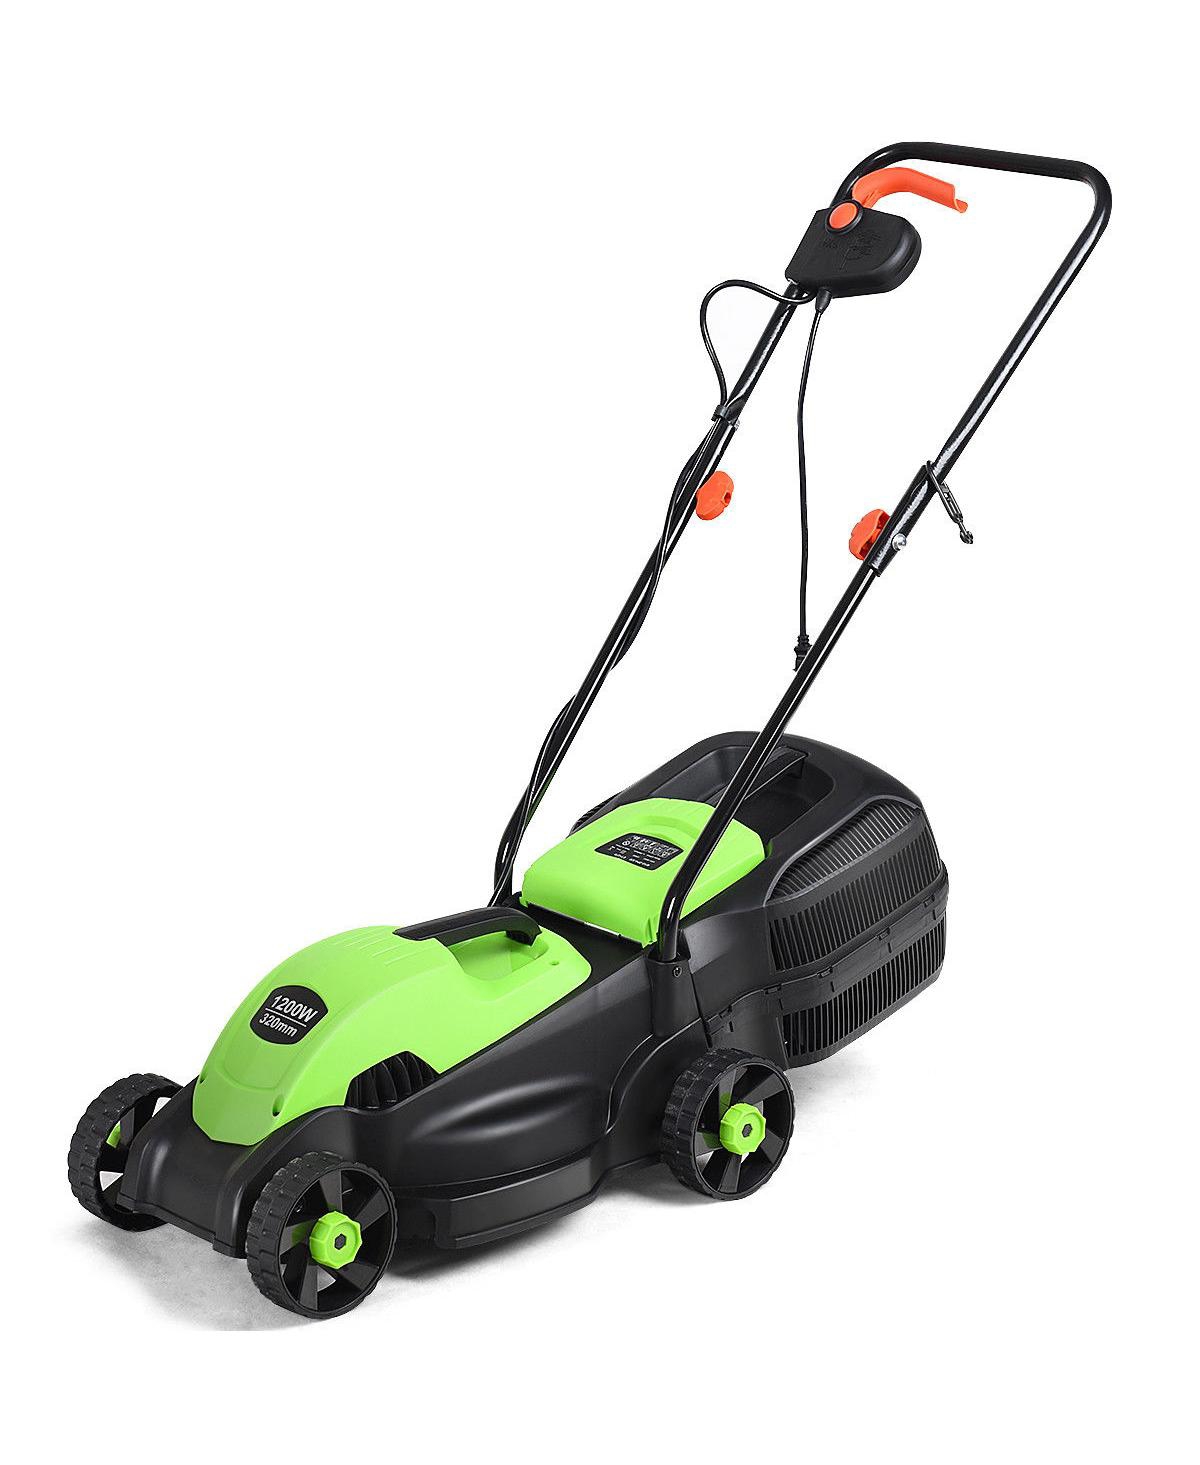 12 Amp 14-Inch Electric Push Lawn Corded Mower With Grass Bag - Green